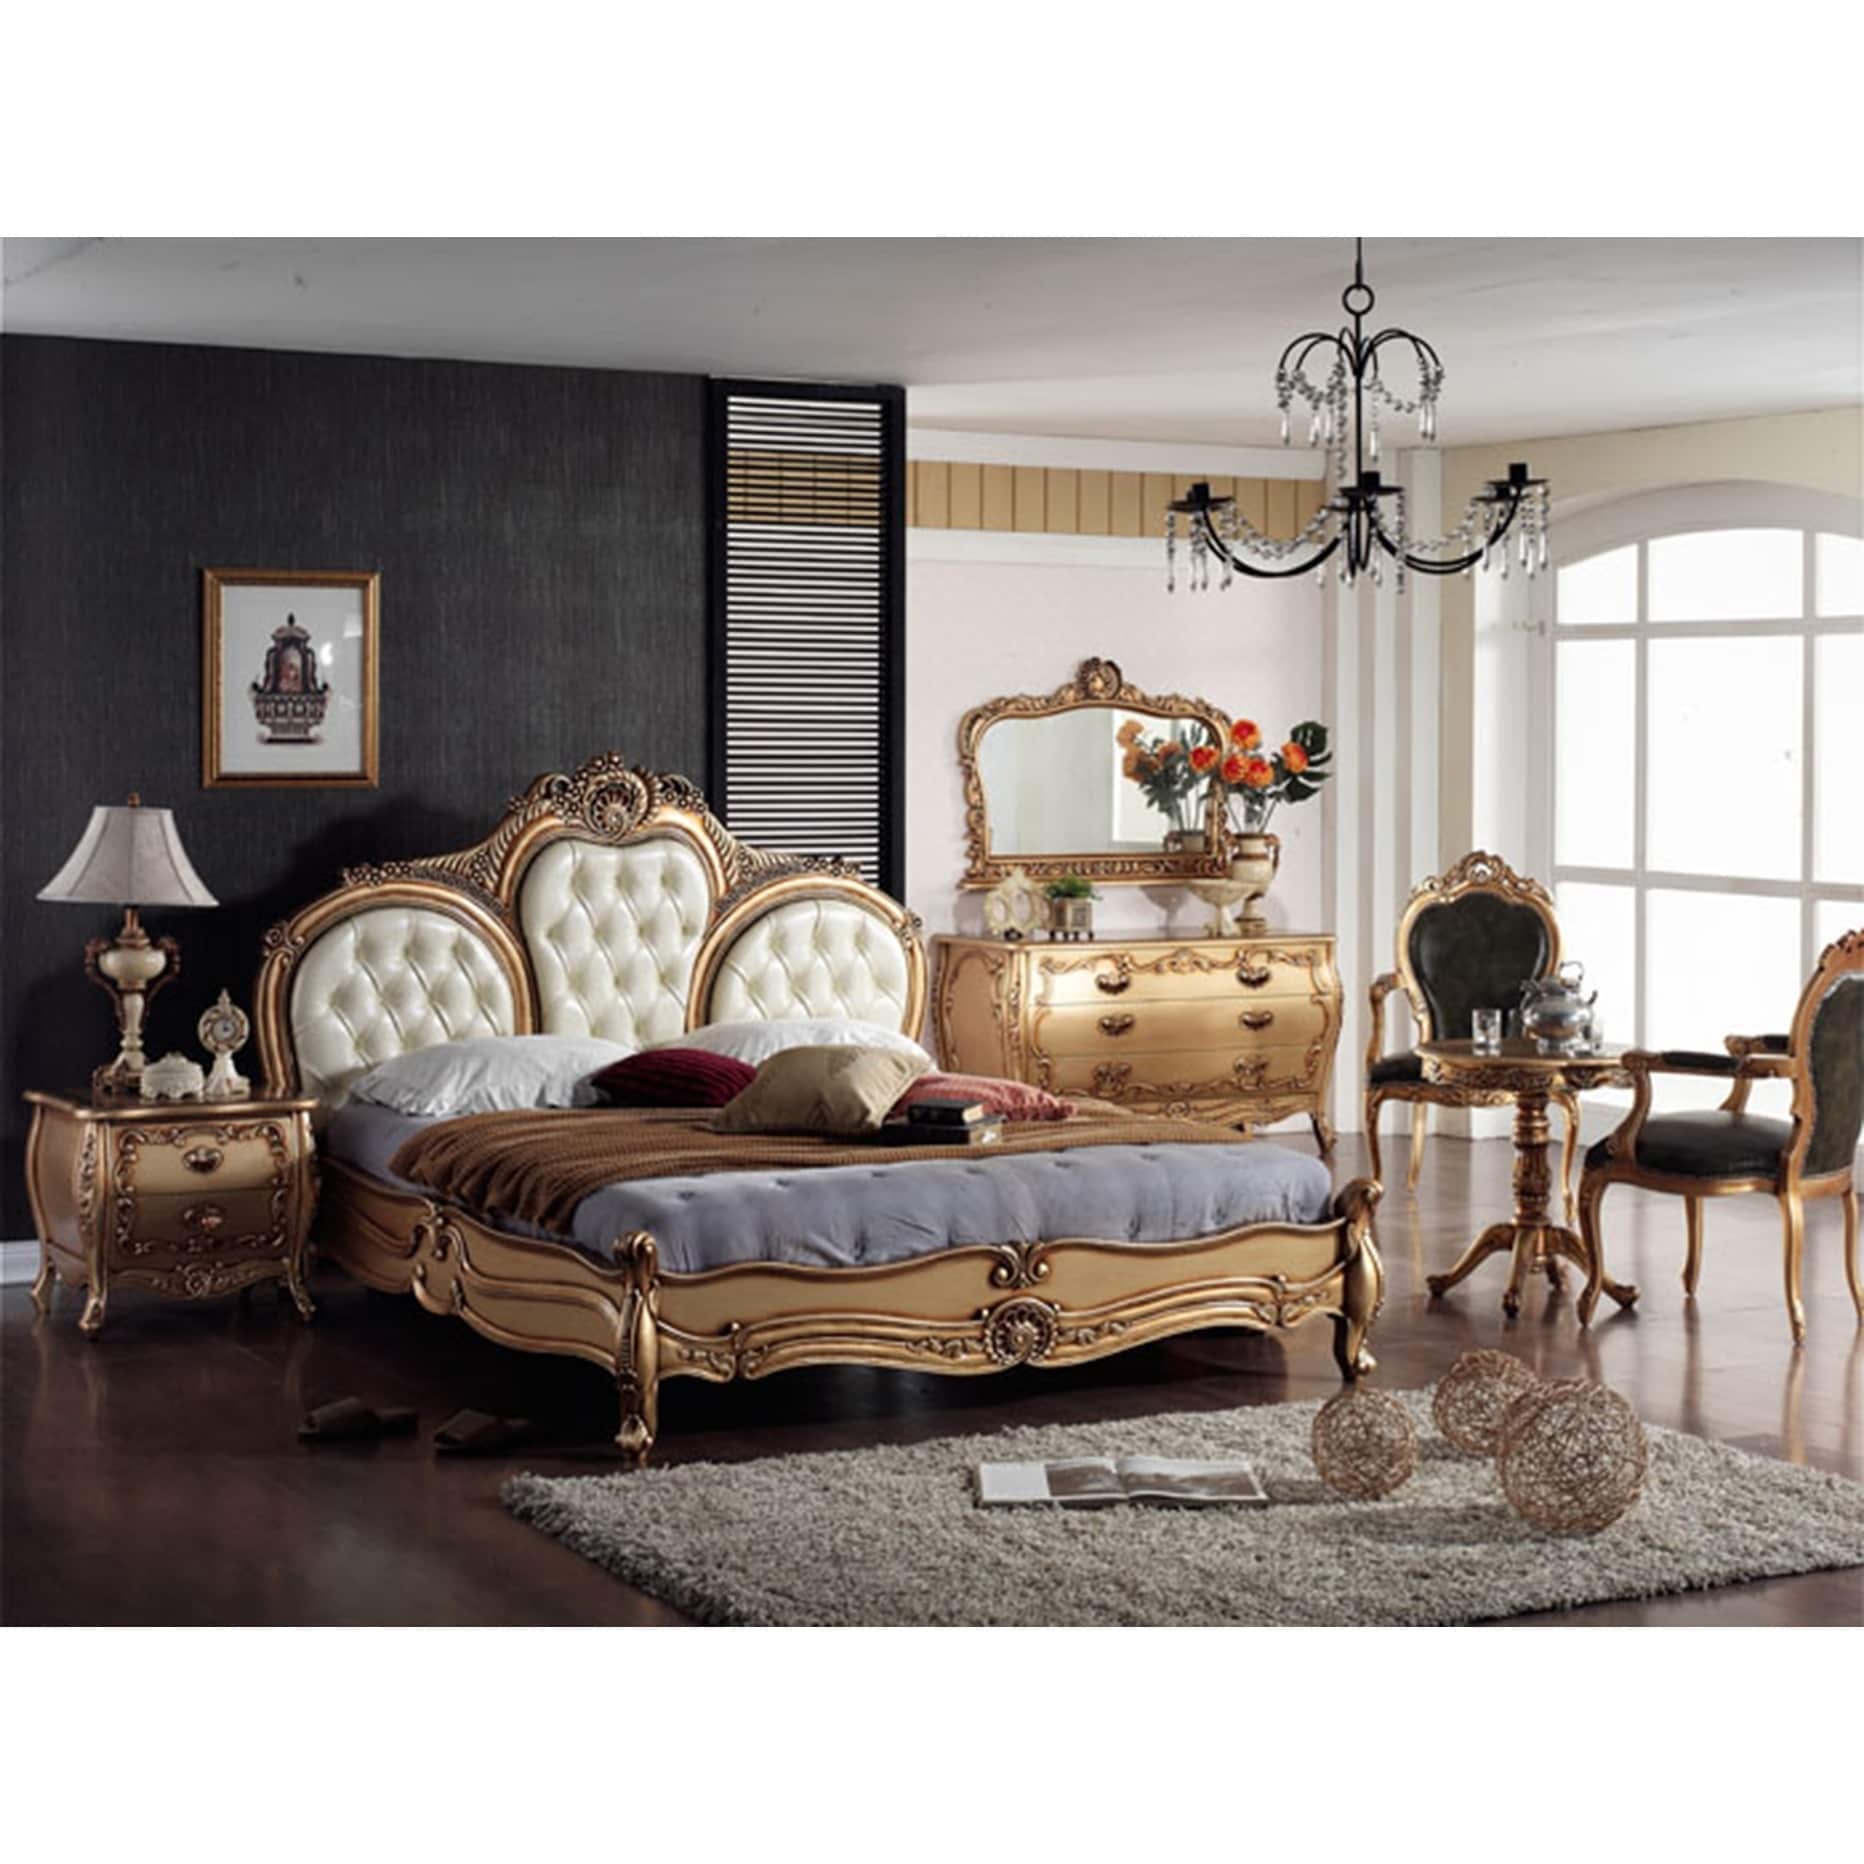 Gold White French Queen Bedroom Set Made From All Solid Mahogany Wood Includes Bed 2 Side End Tables Dressor And Mirror